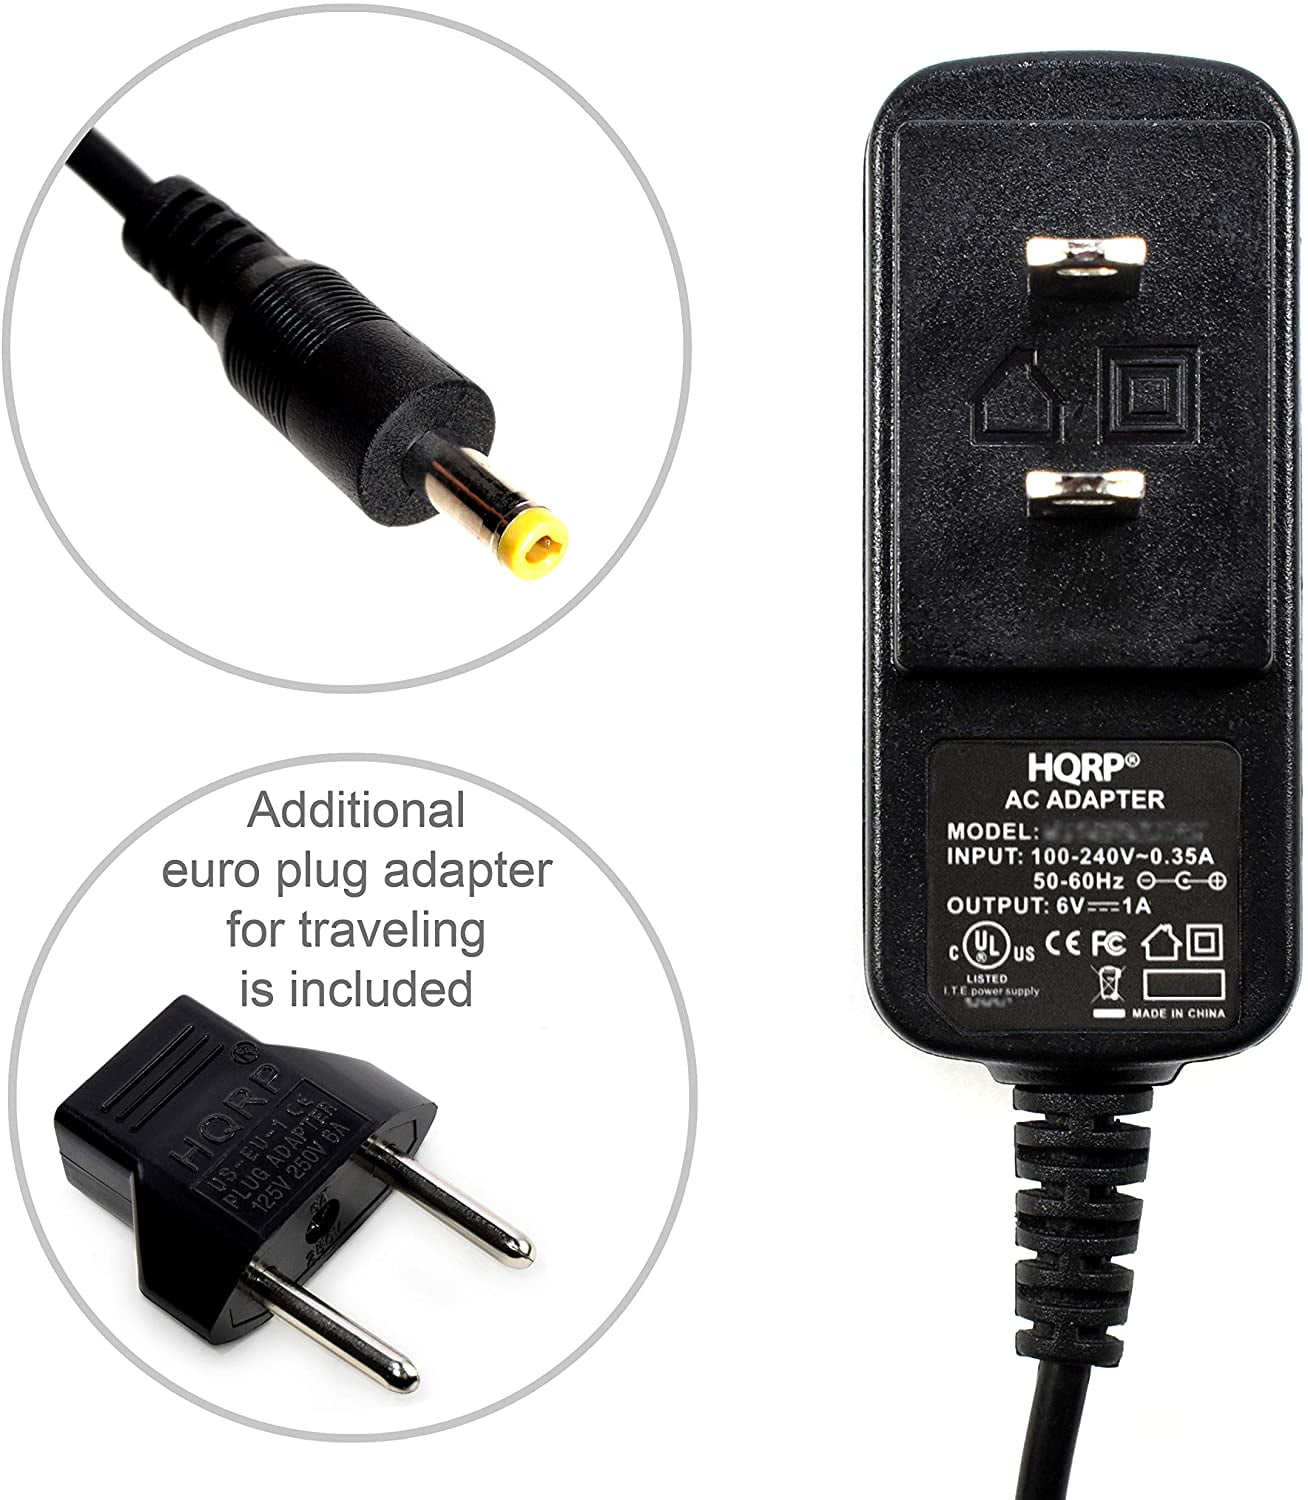 HQRP AC Power Adapter for Omron Healthcare S-9515336-9 M6 Comfort